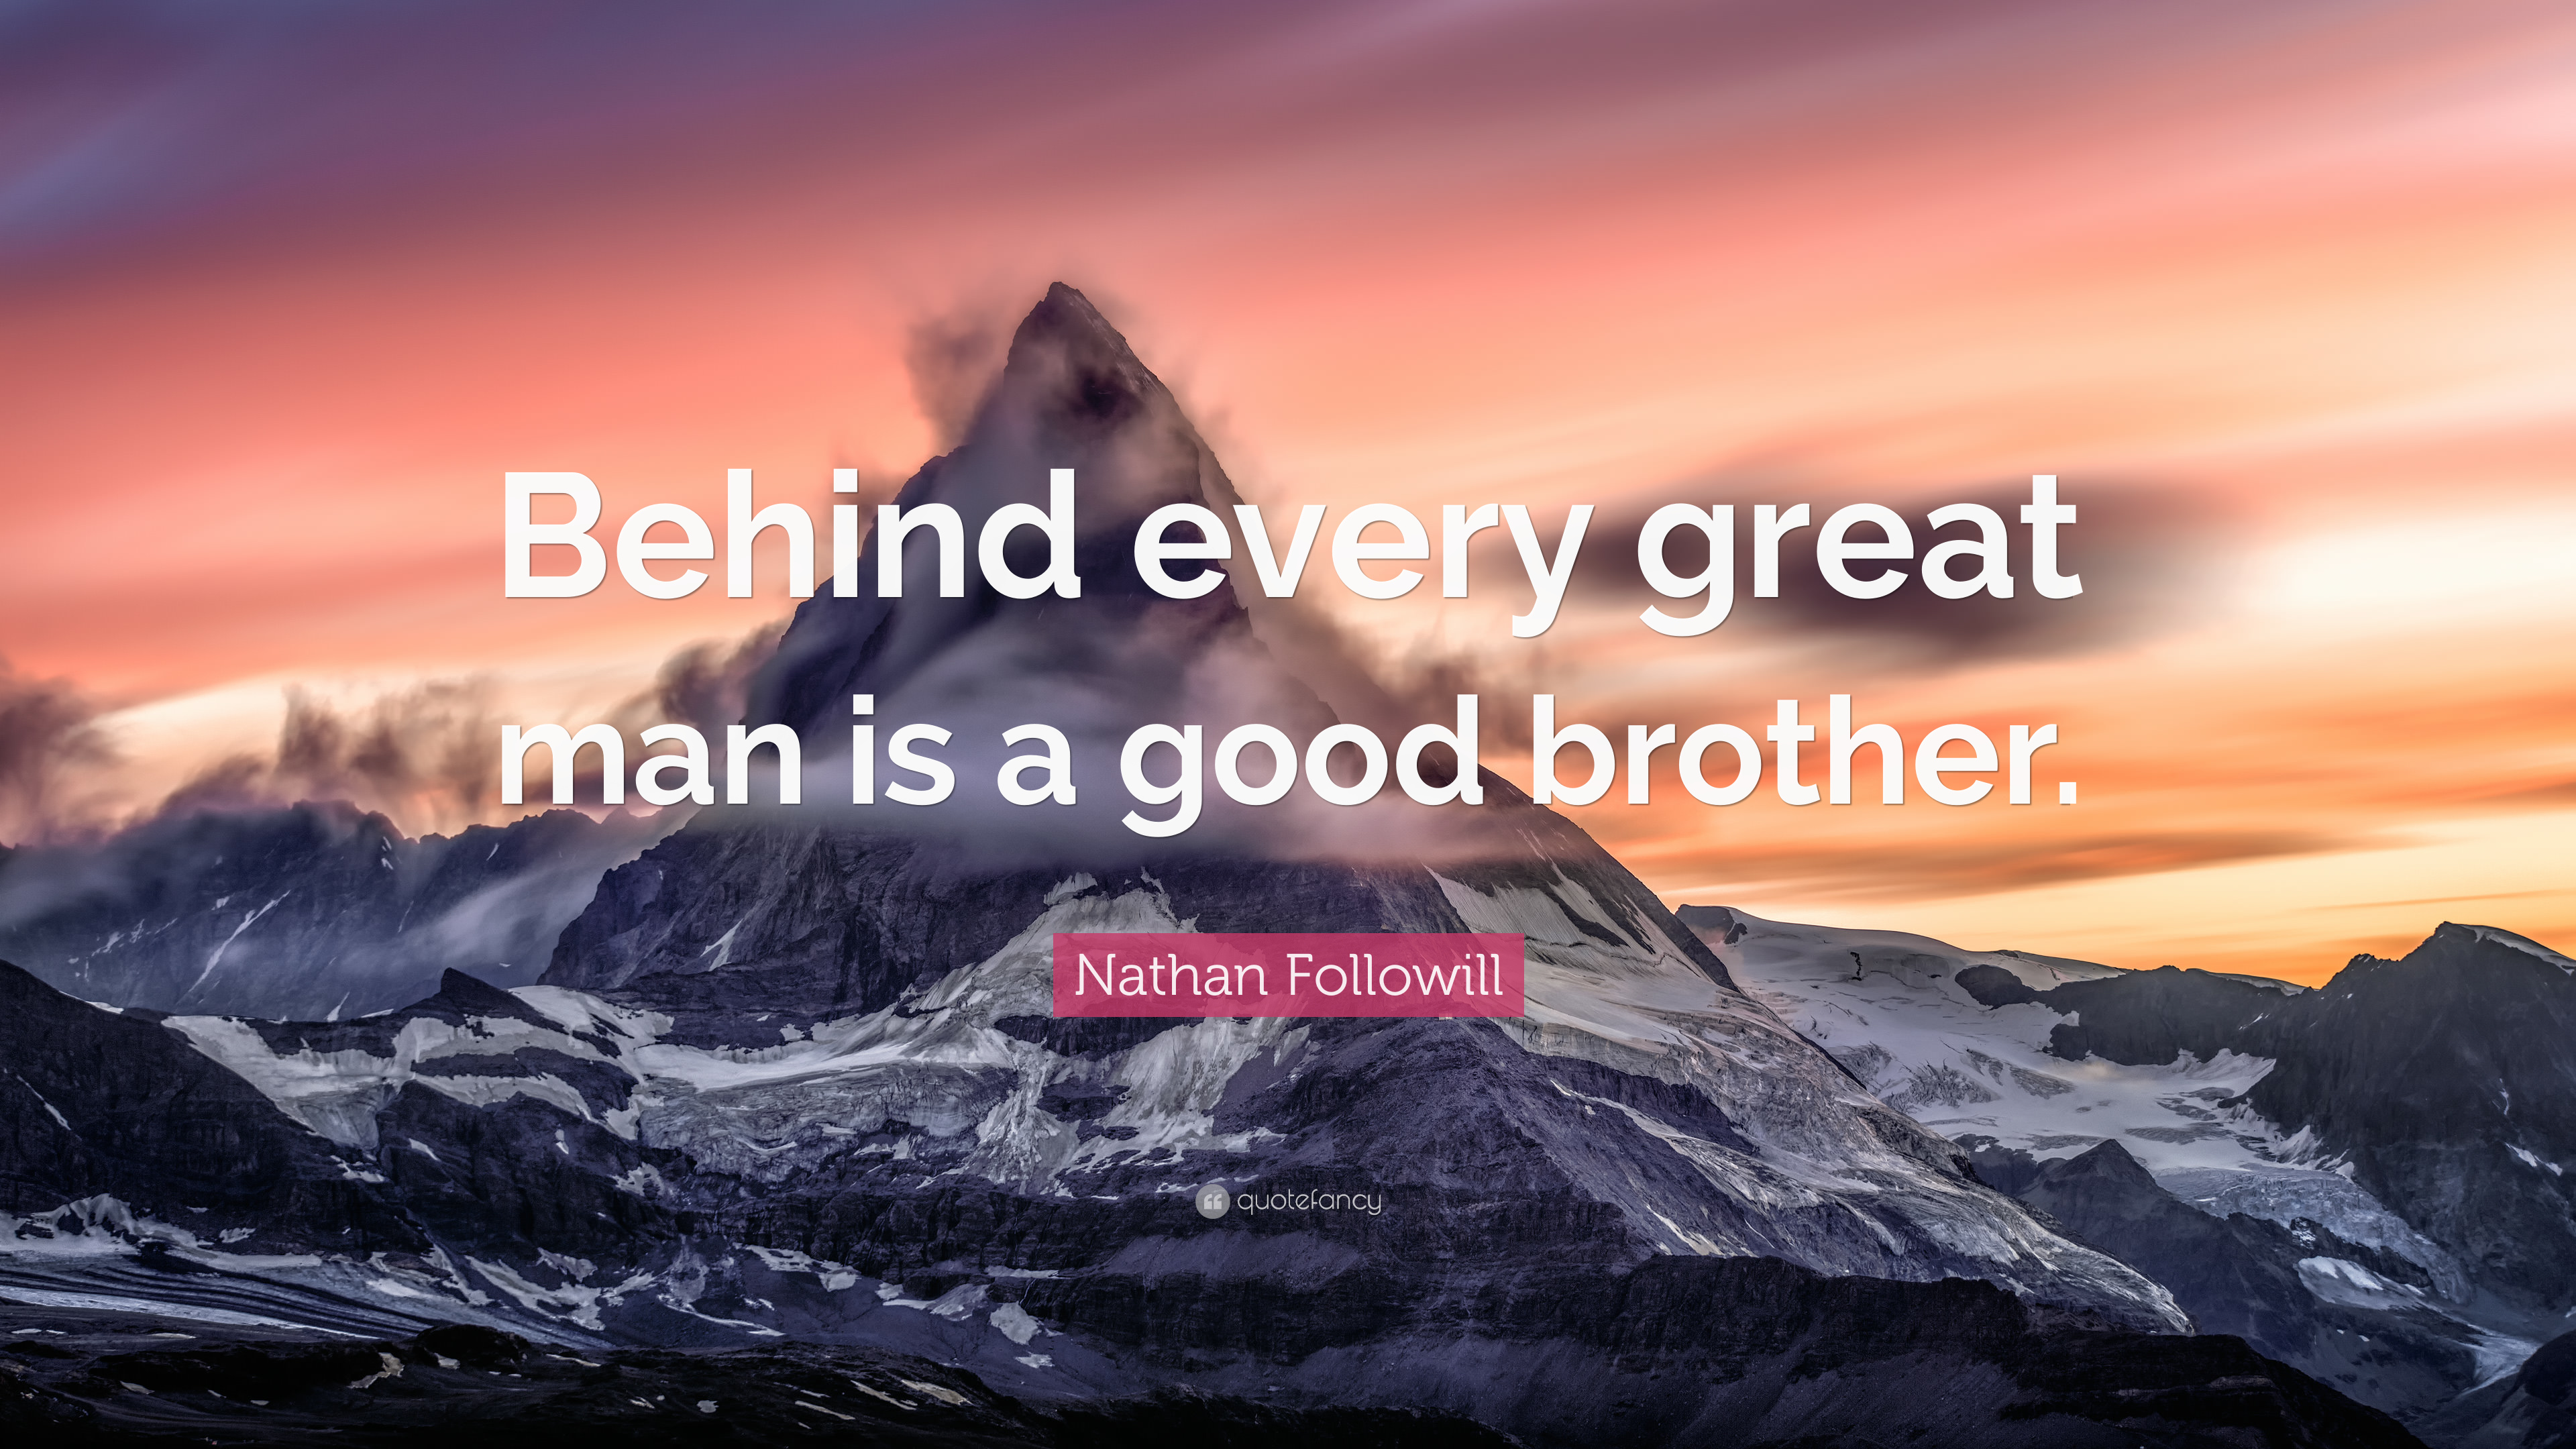 Nathan Followill Quote: “Behind every great man is a good brother.”